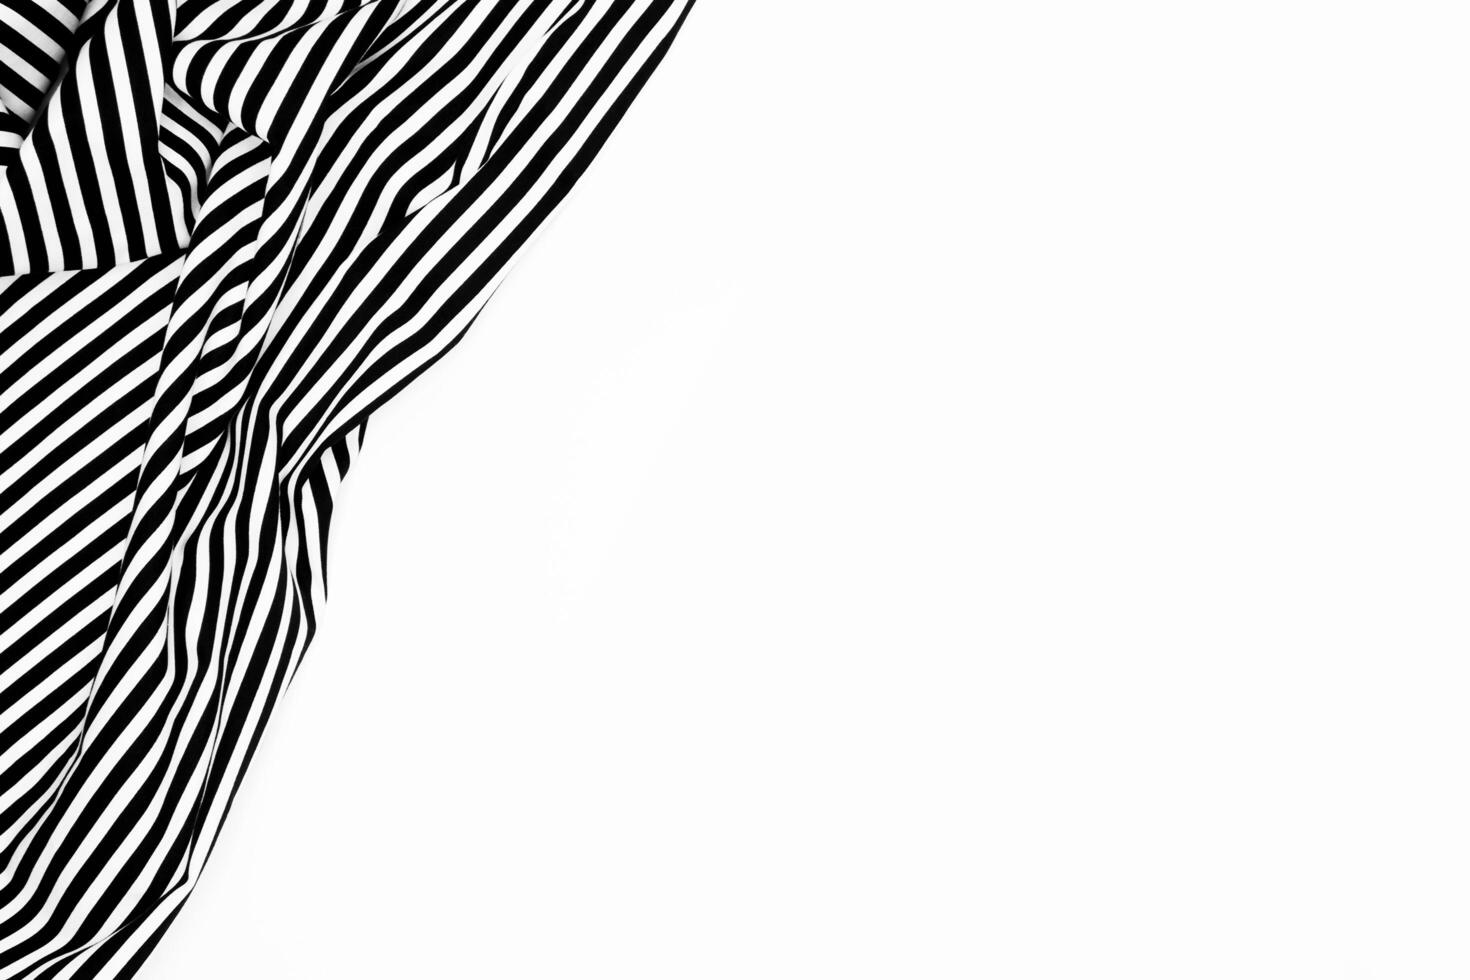 Wrinkled black and white striped fabric isolated on white background photo